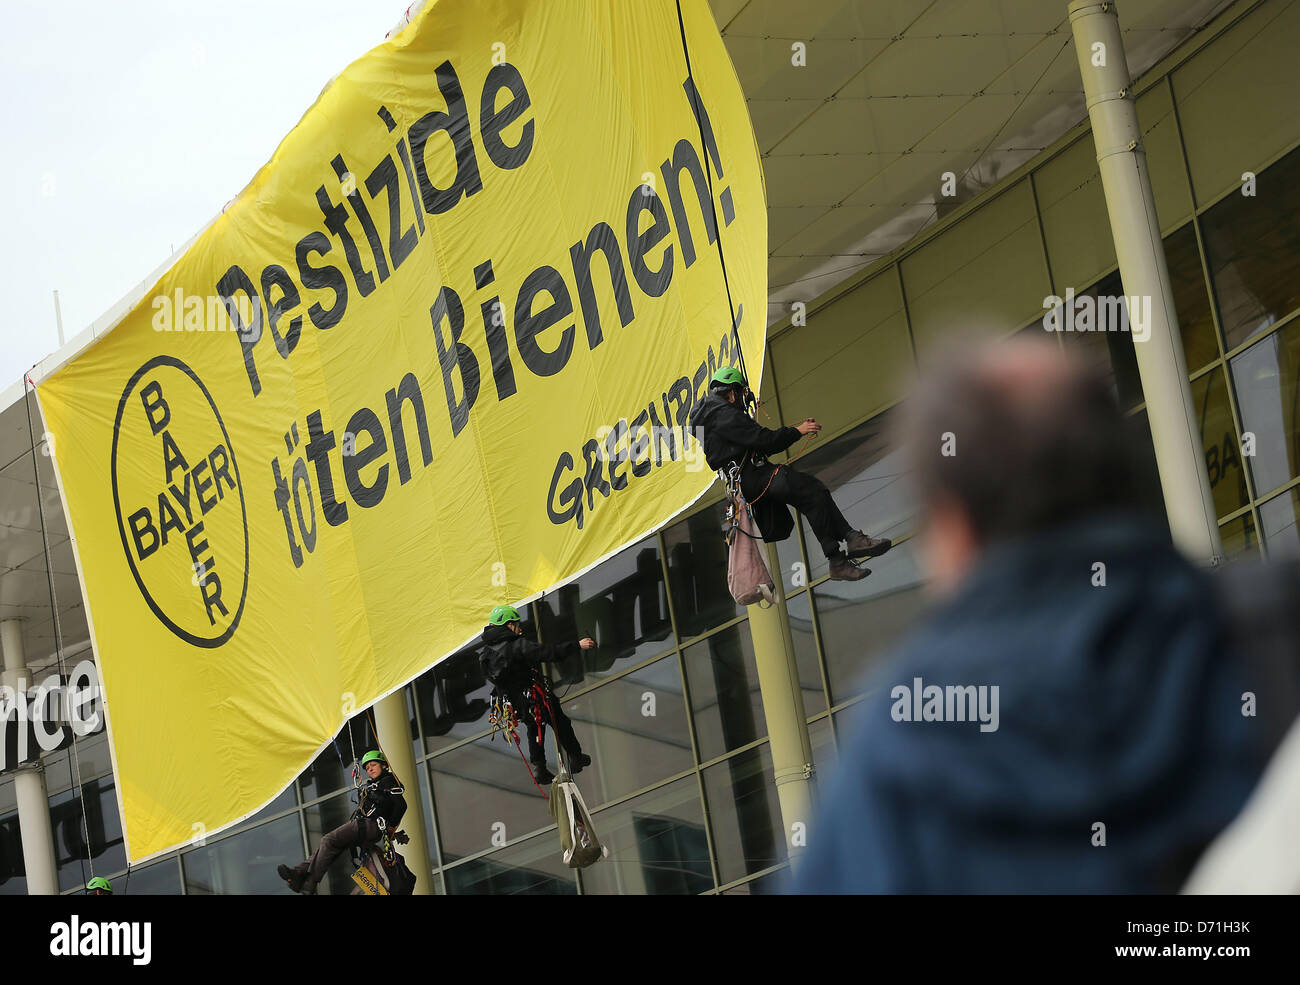 Cologne, Germany. 26th April, 2013. Greenpeace activists demonstrate in front of the site of the shareholder's meeting of pharmaceutical and chemical company Bayer in Cologne, Germany, 26 April 2013. The organisation raised awareness for pesticides and its effects on bees. Photo: OLIVER BERG/dpa/Alamy Live News Stock Photo